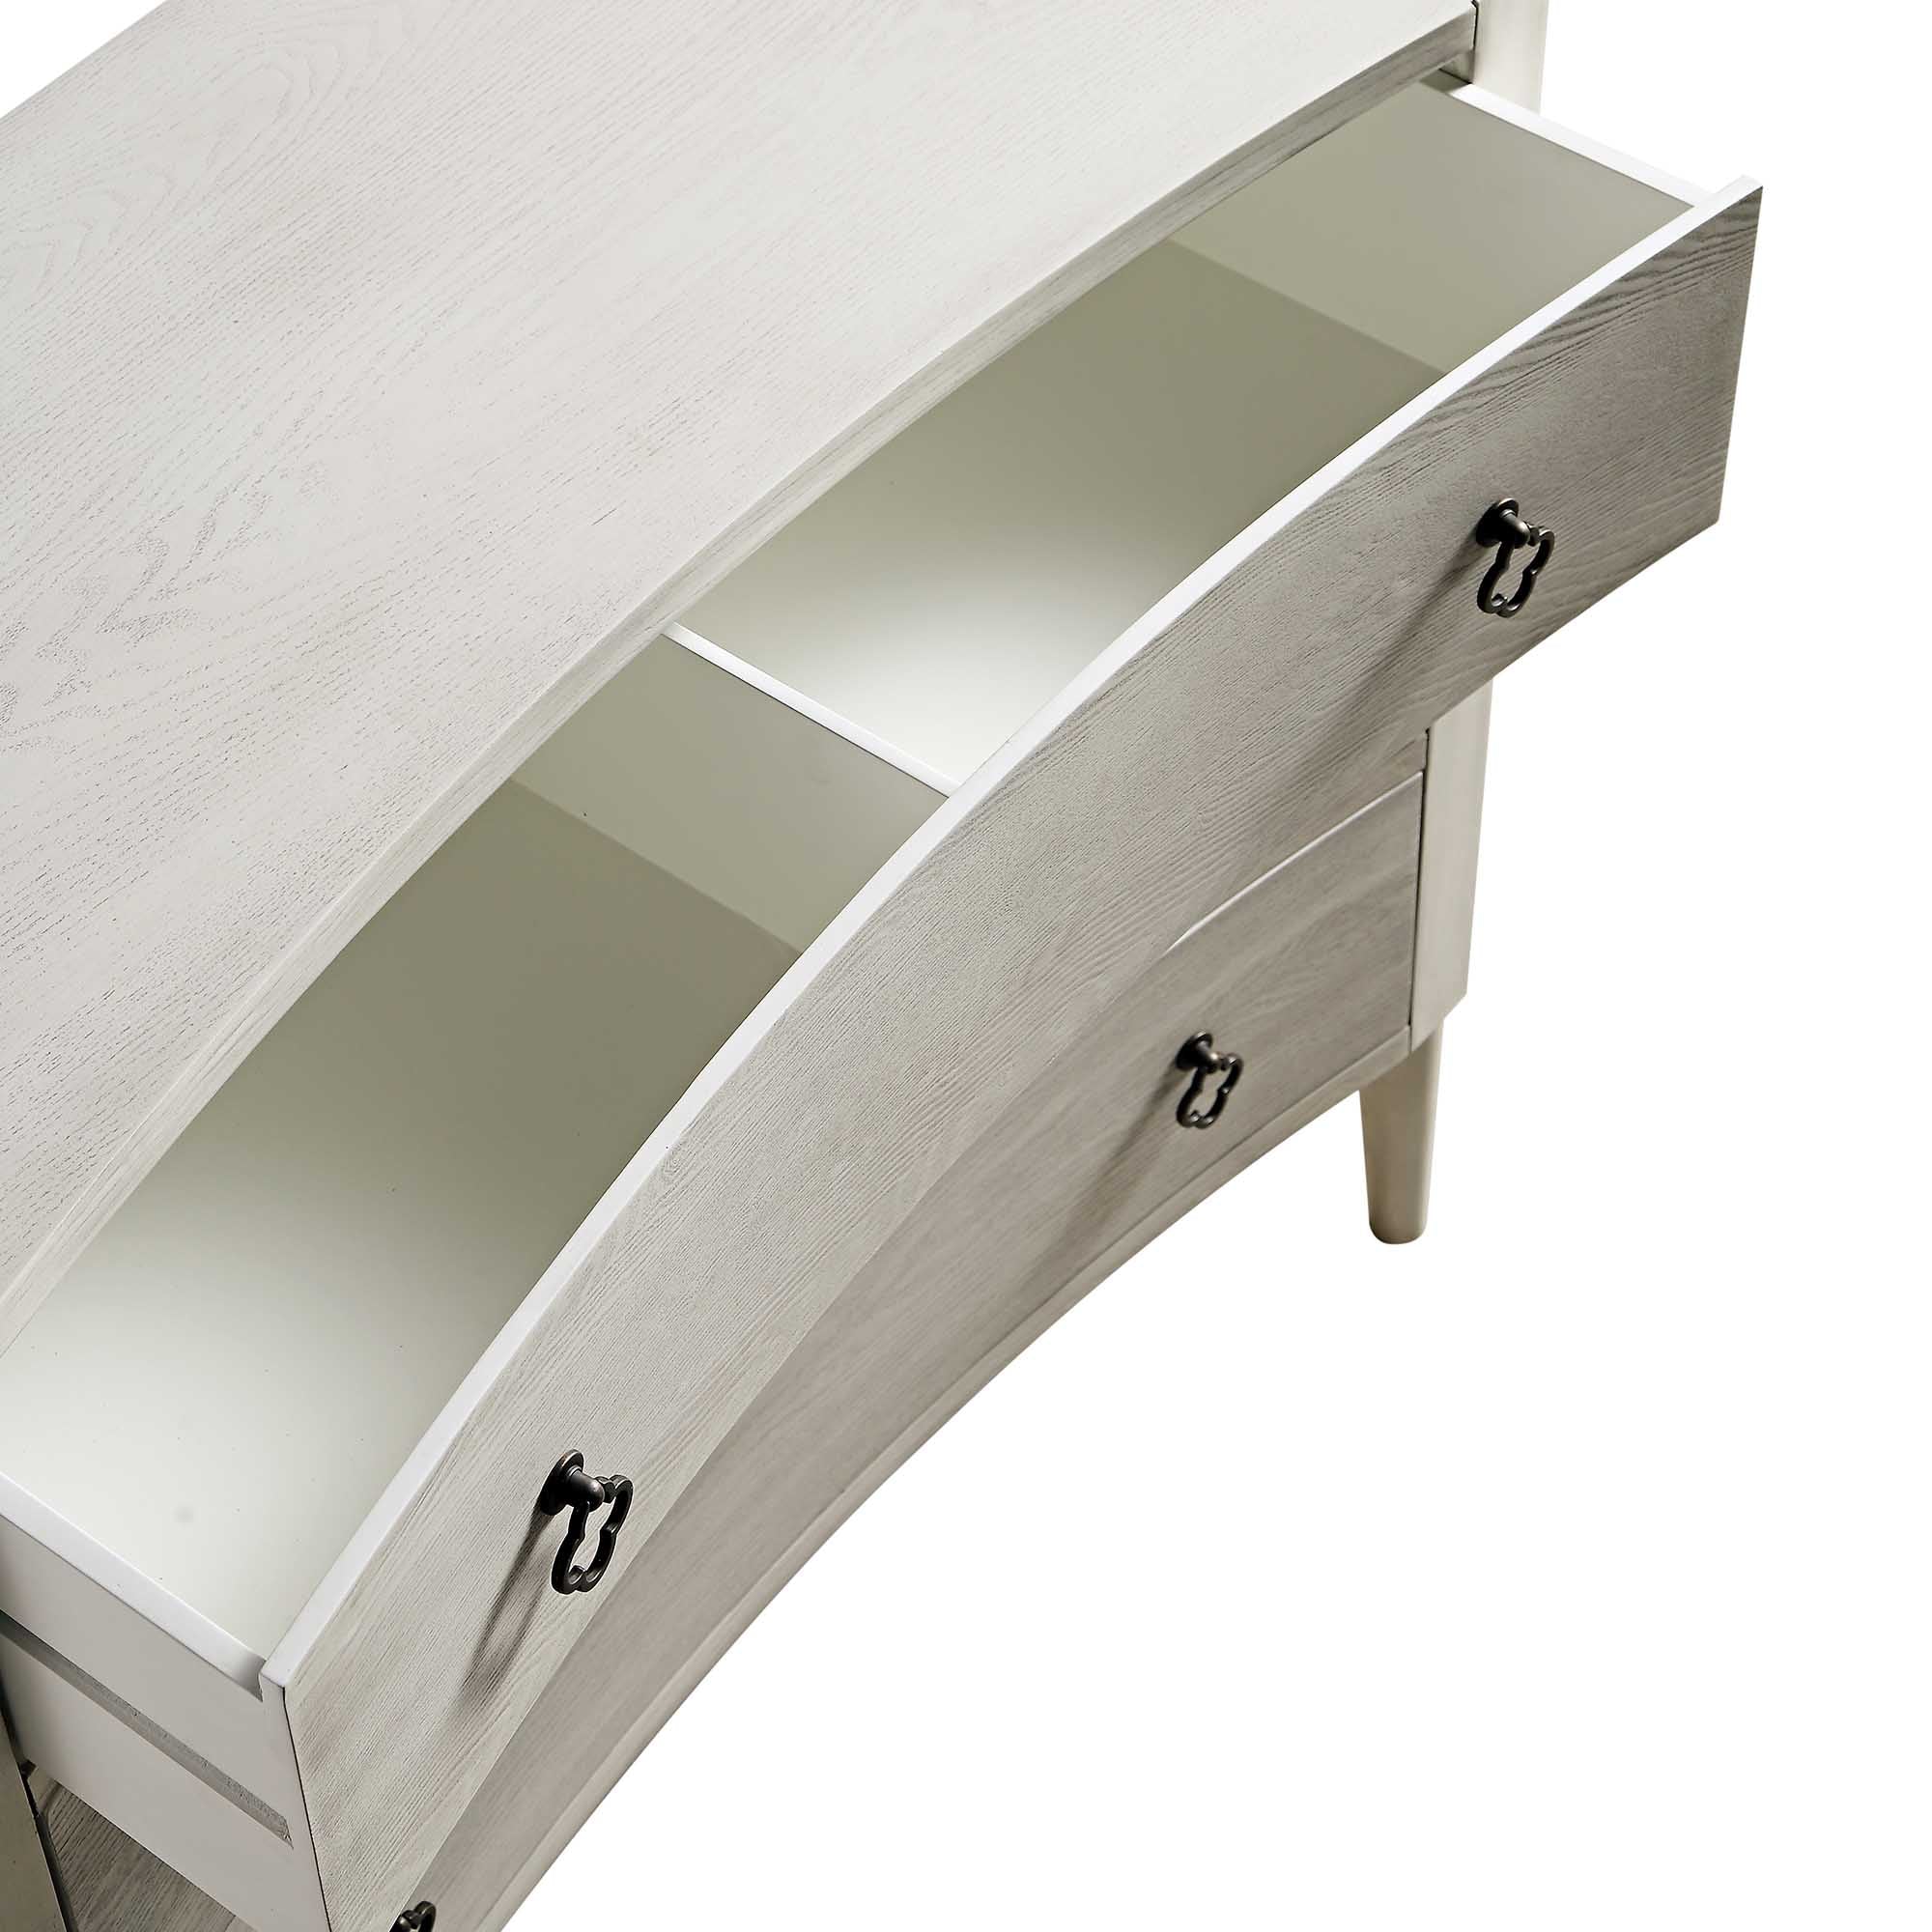 Thalia Concave Chest of Drawers, Washed White